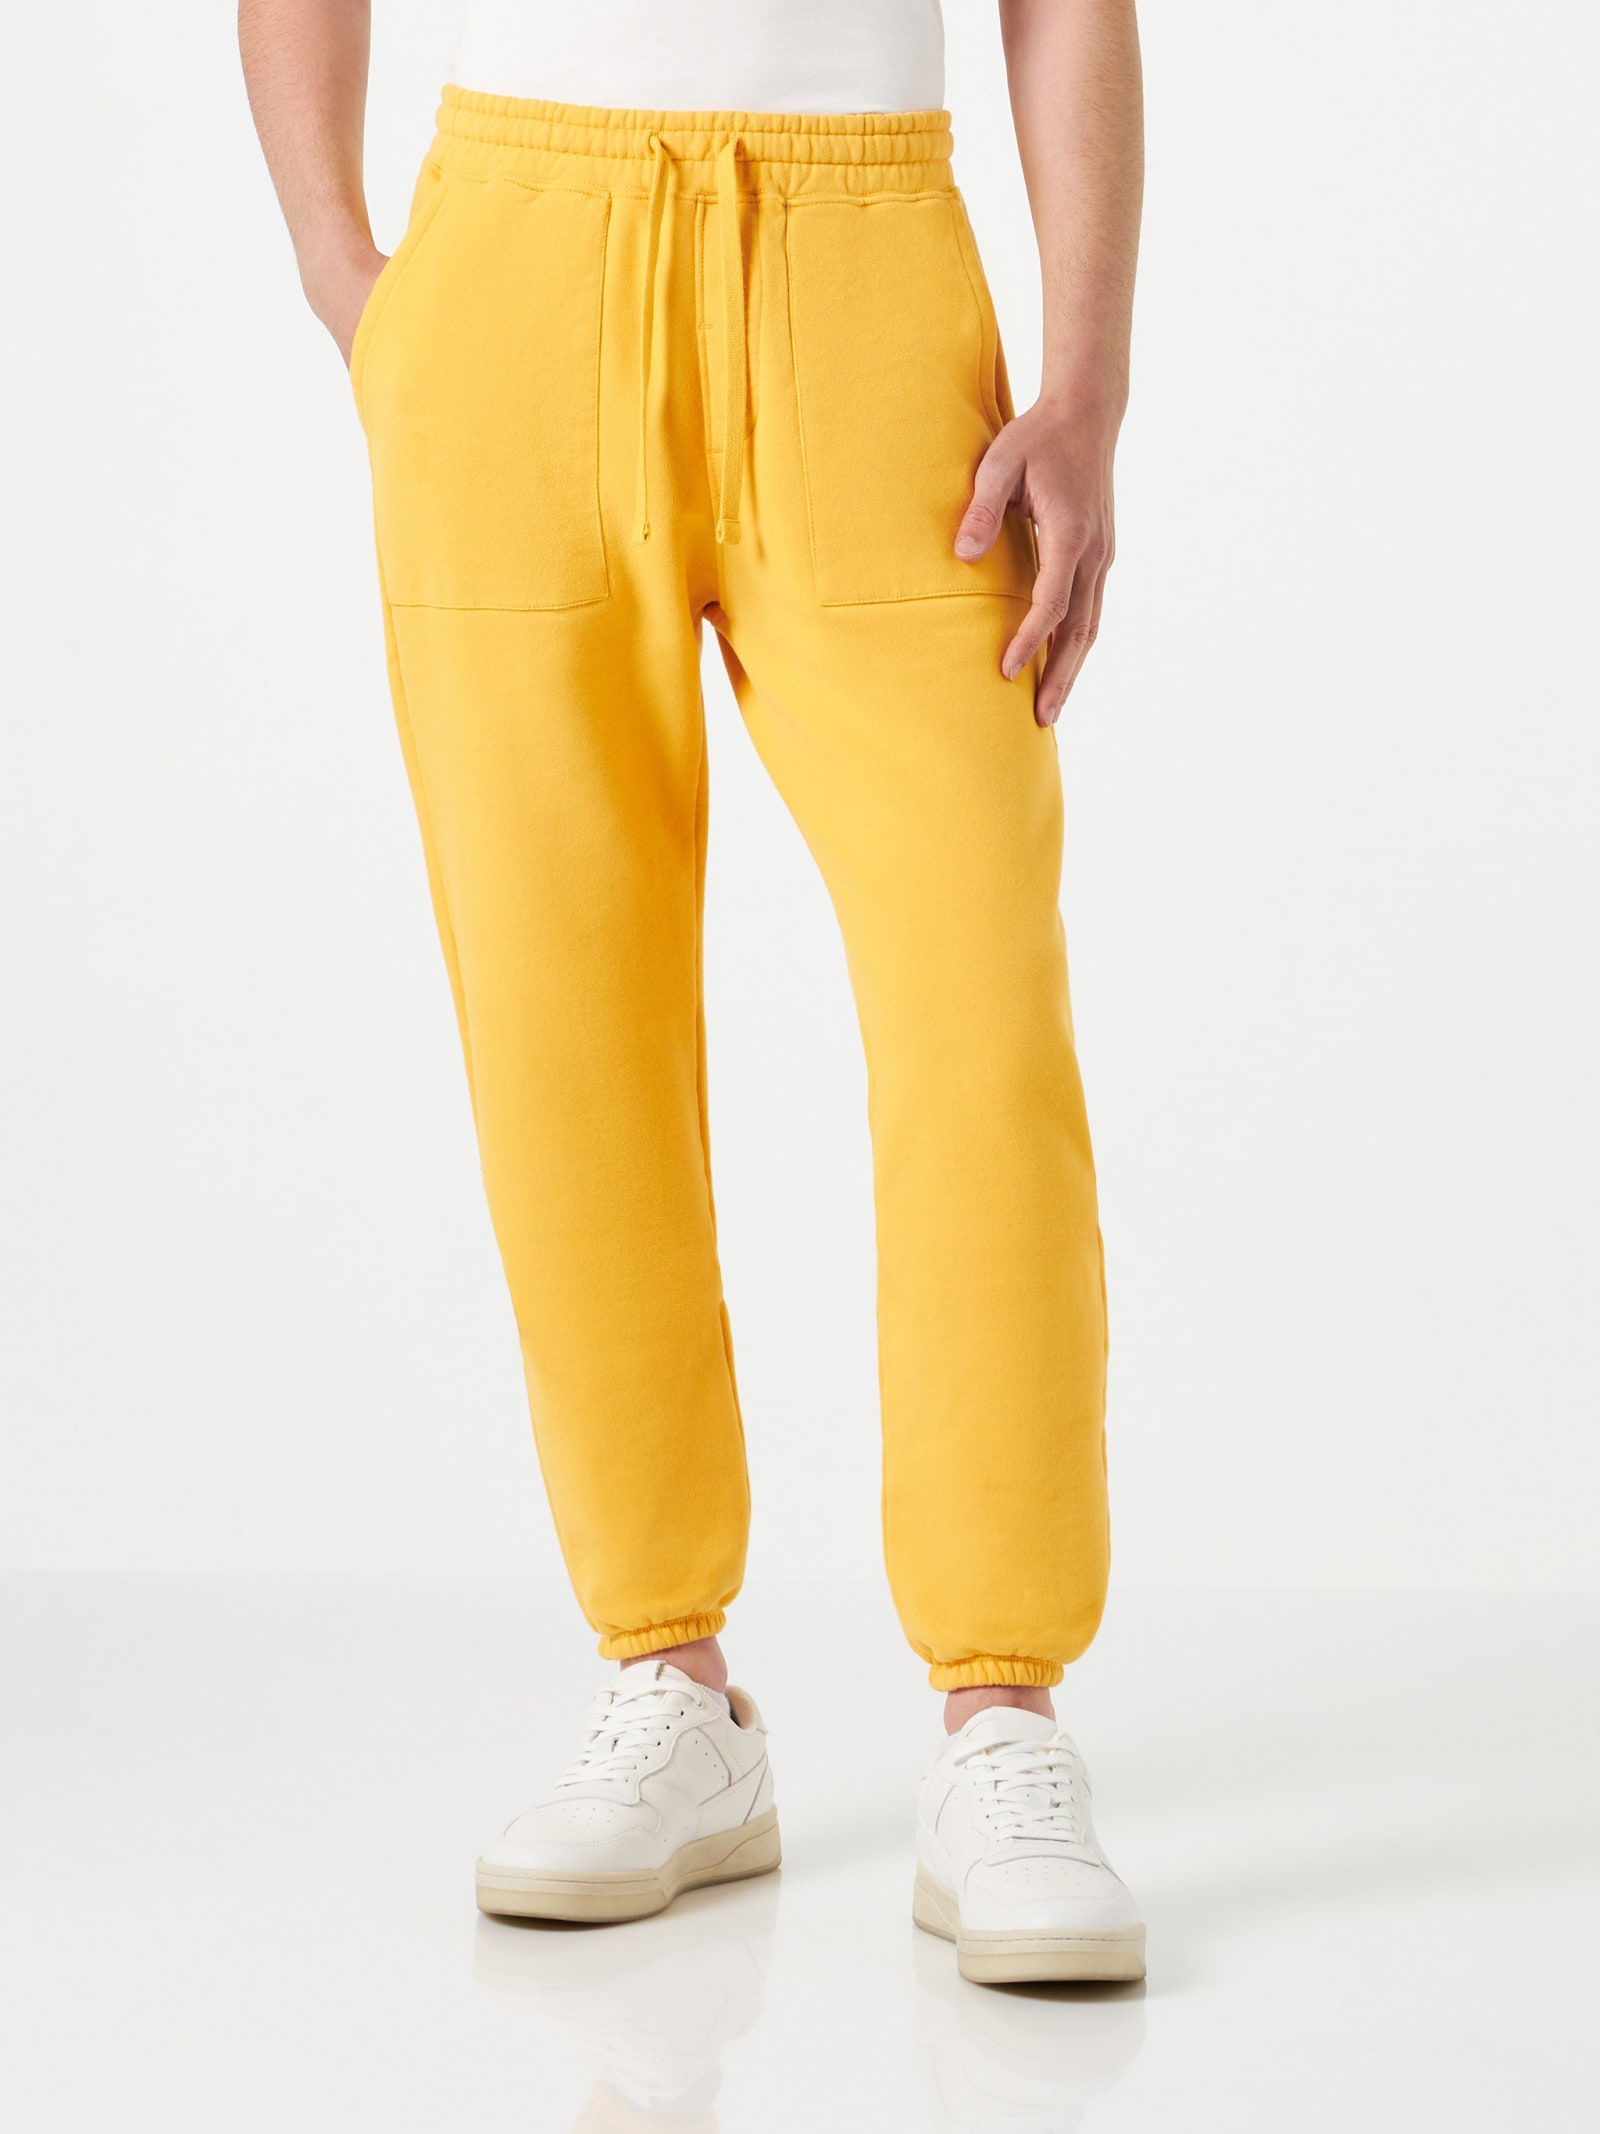 Yellow-ochre Track Pants Pantone Special Edition